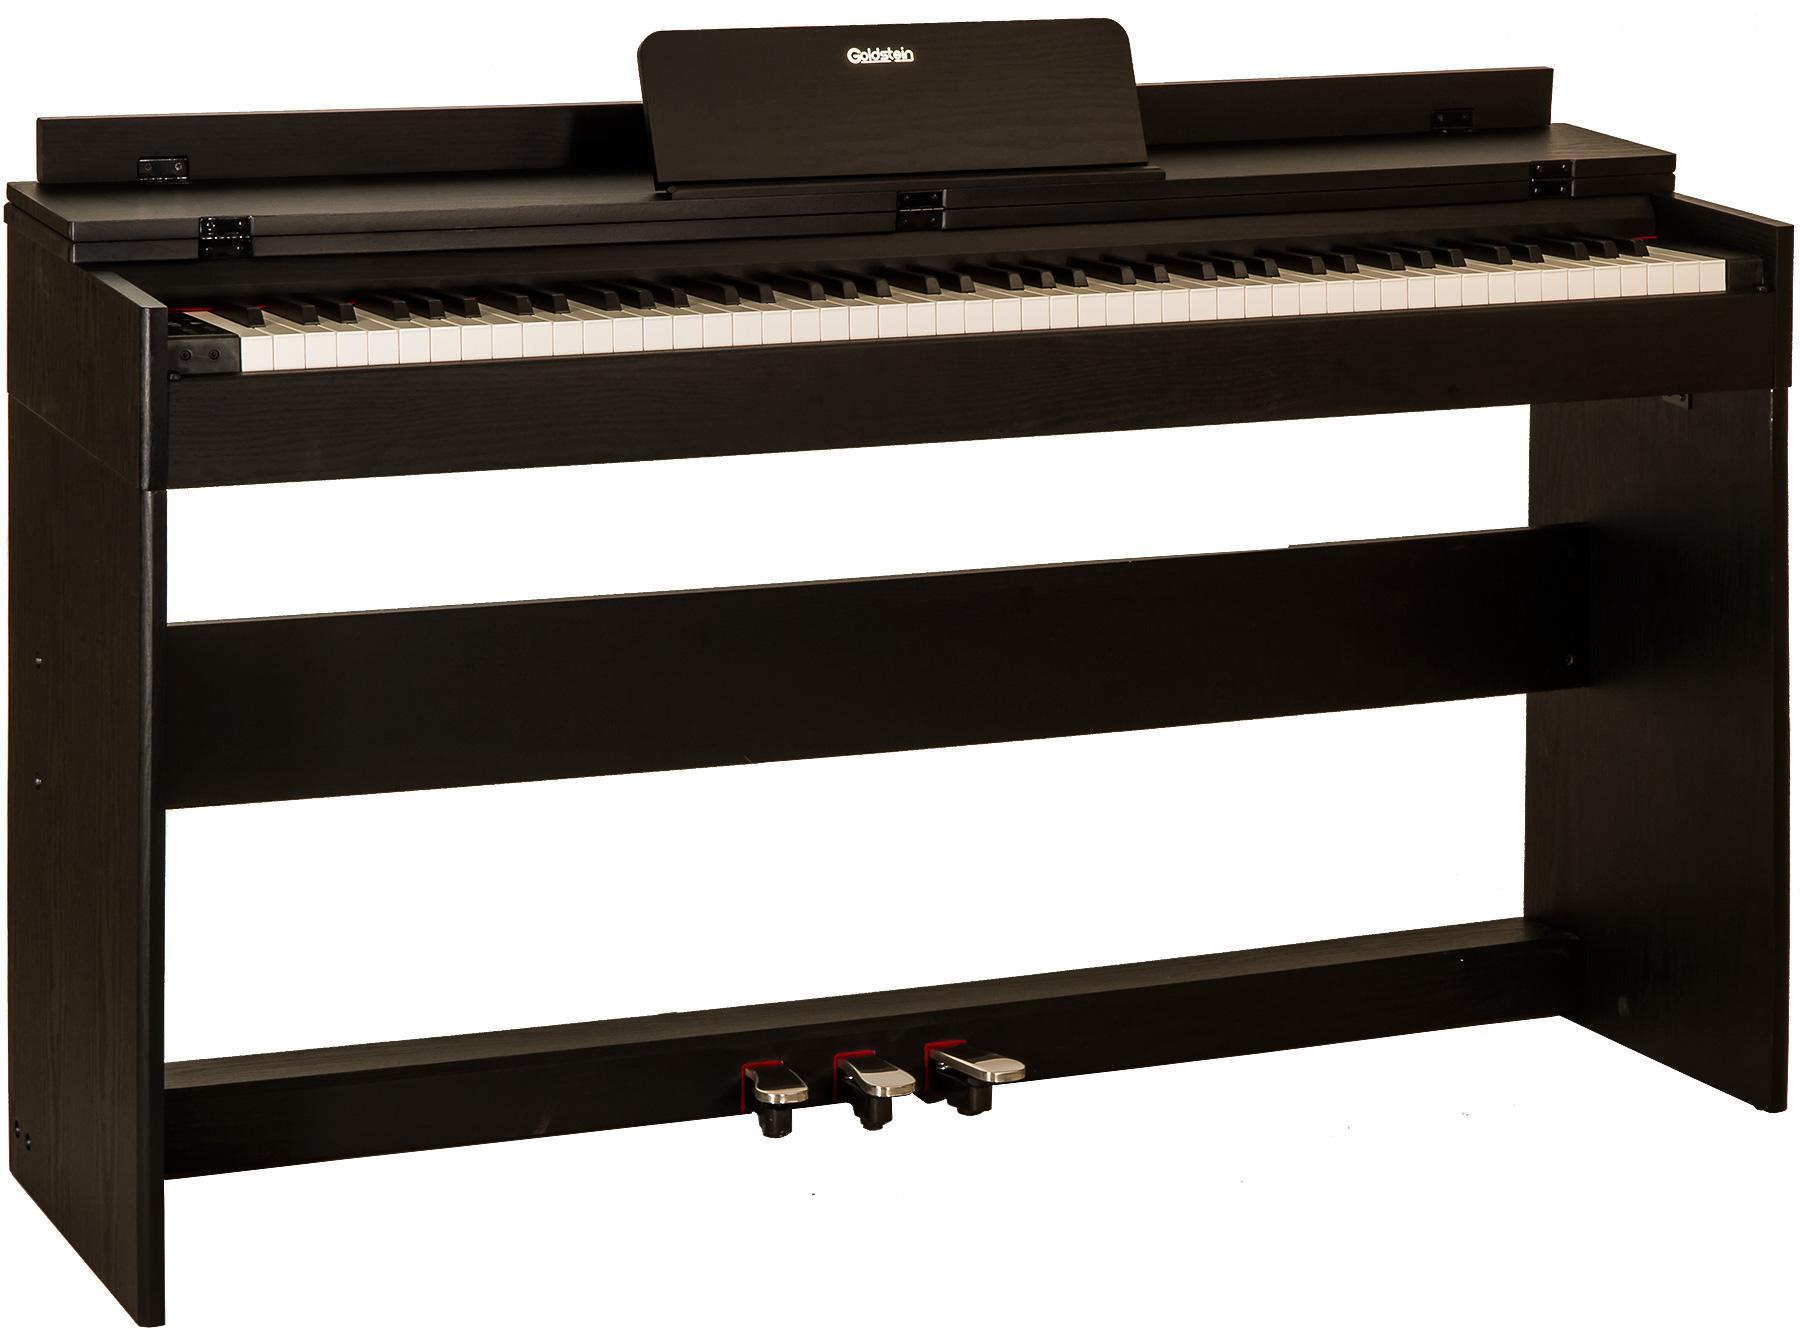 Digital piano with stand Goldstein GLP-8 - Noir